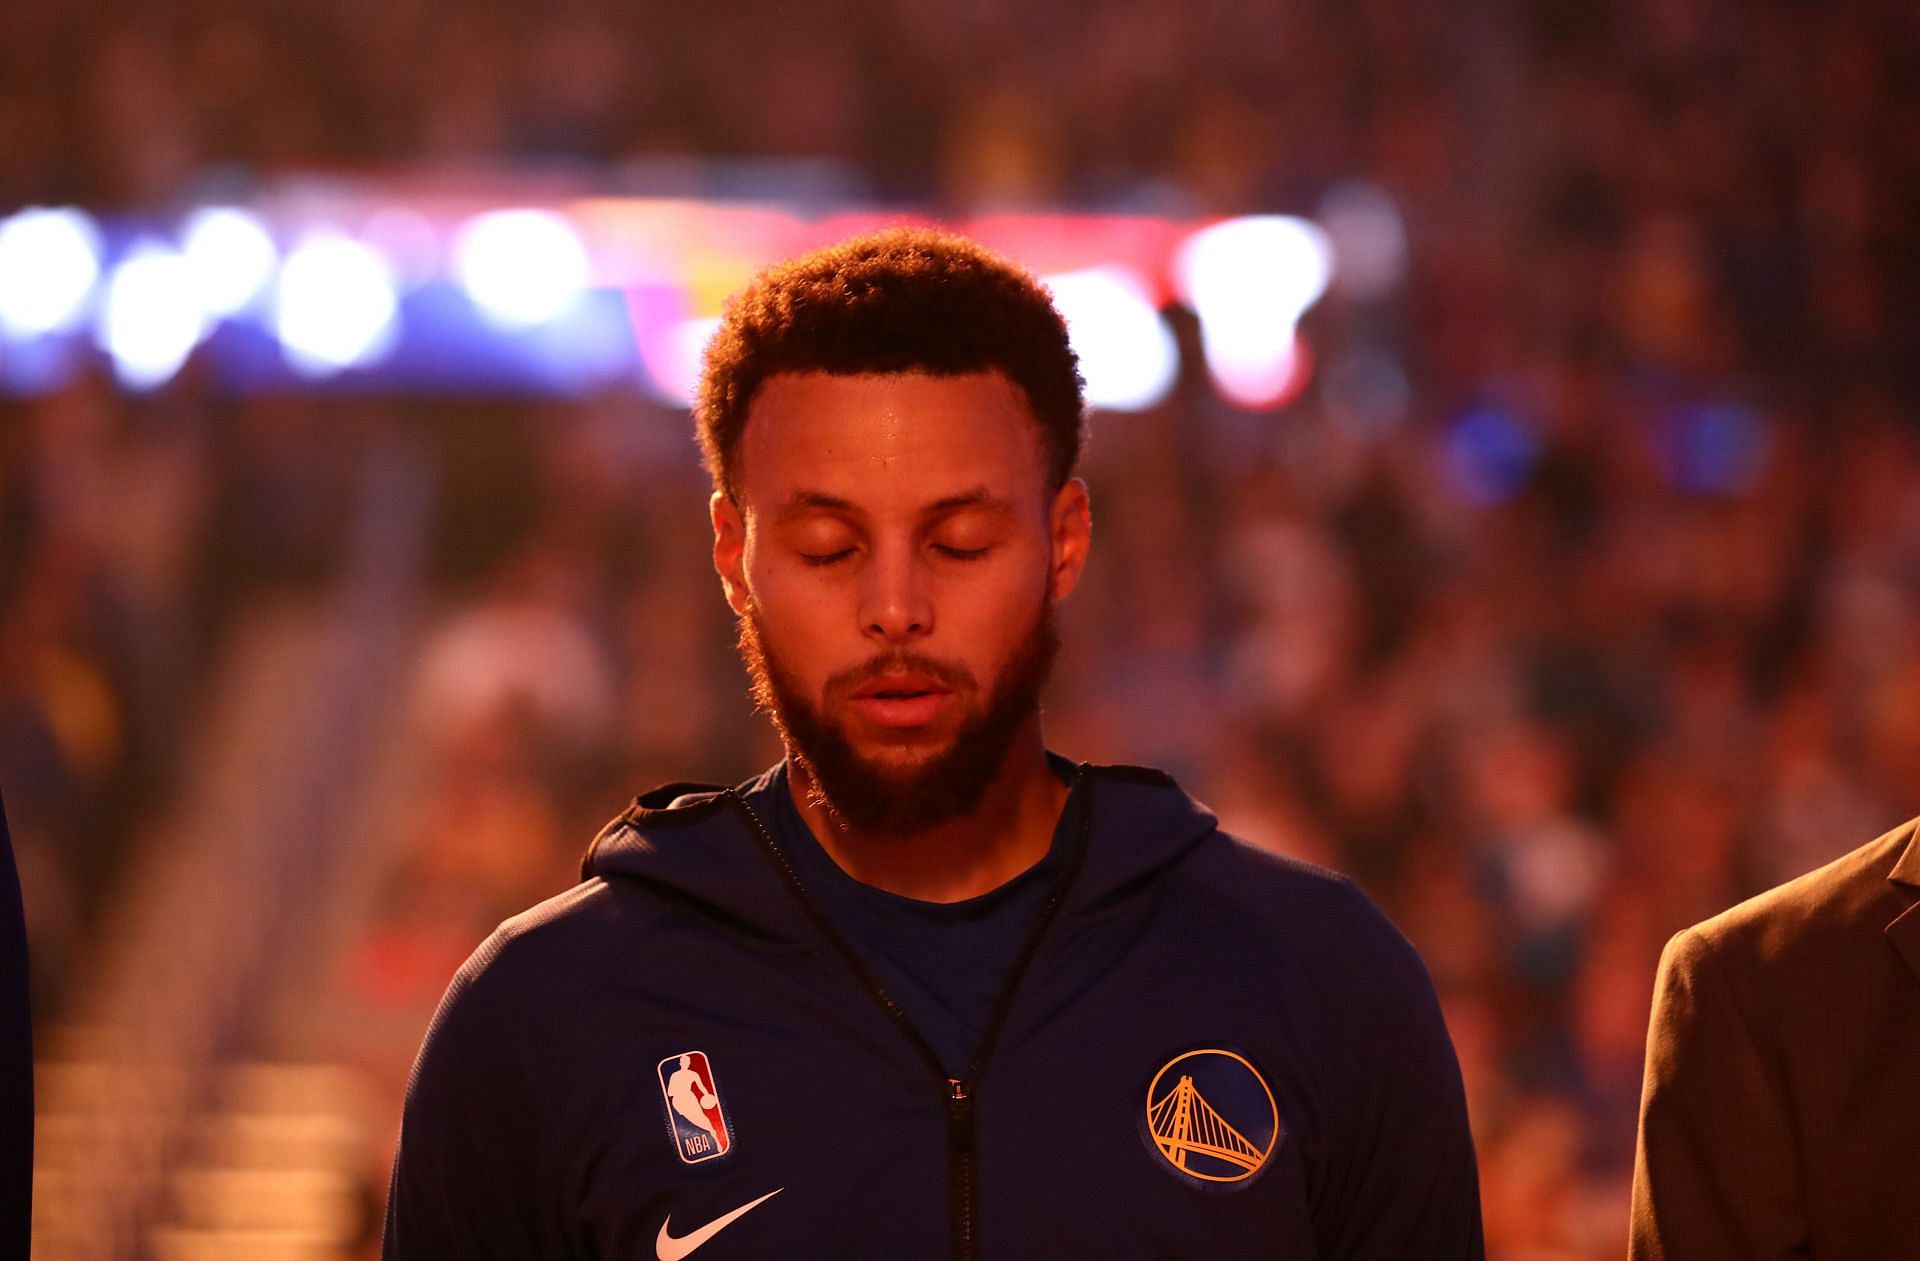 Stephen Curry is the face of the Warriors franchise